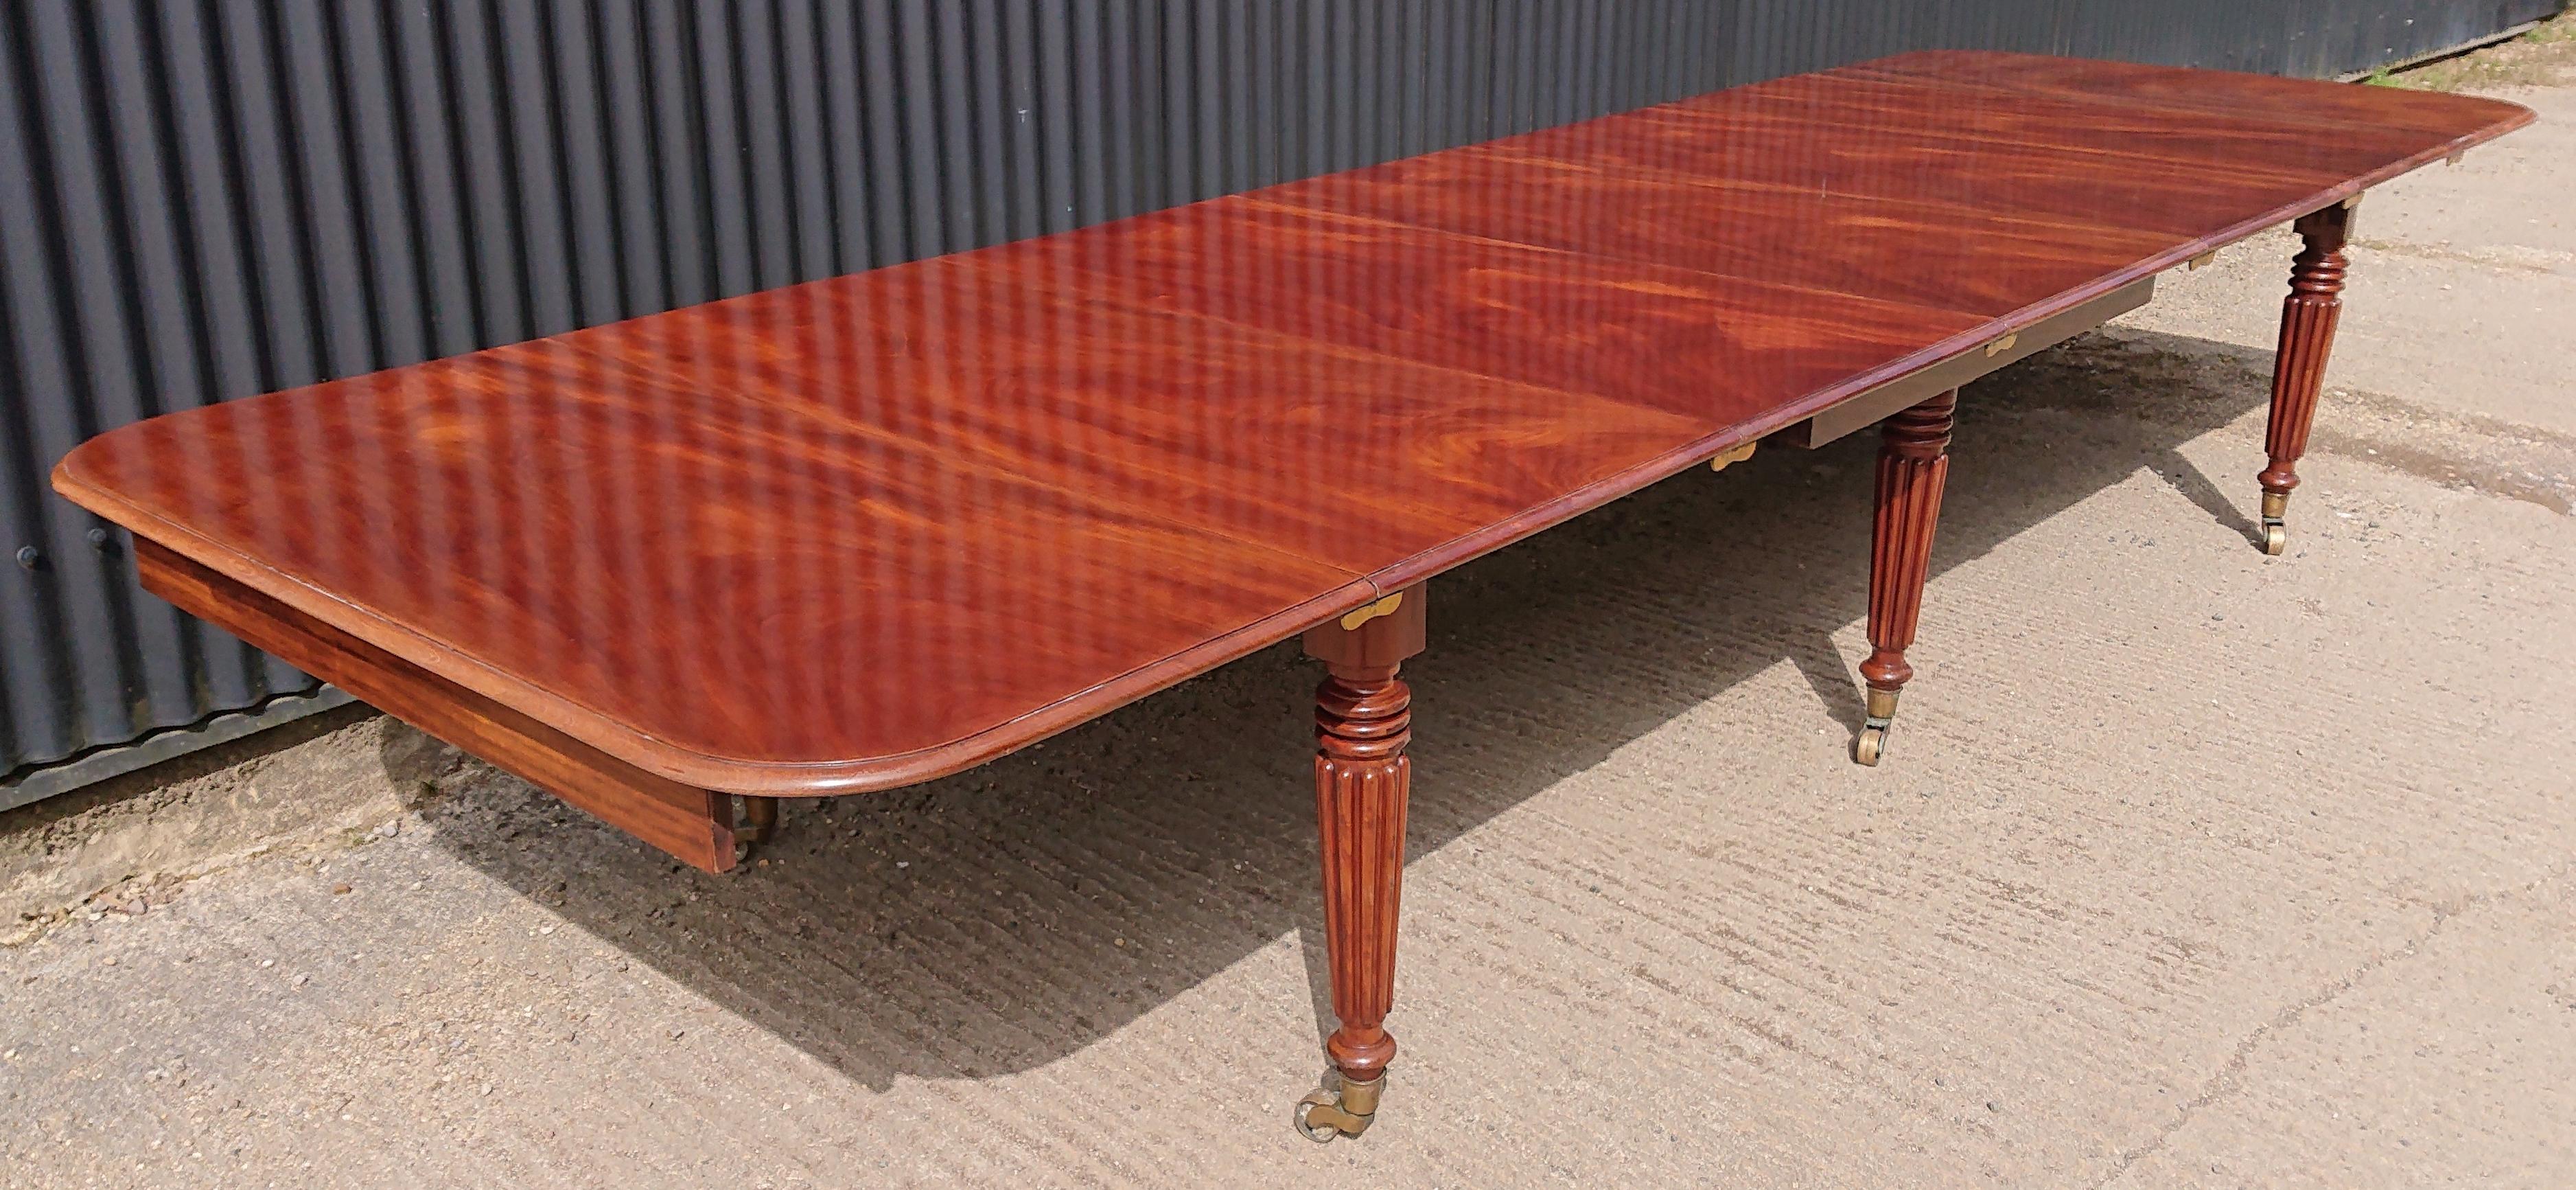 Early 19th century Regency mahogany extending dining table attributed to Gillow of Lancaster and London. This table has one of the best runs of matched mahogany that we have seen for a long time. The timber has a really beautiful grain pattern and